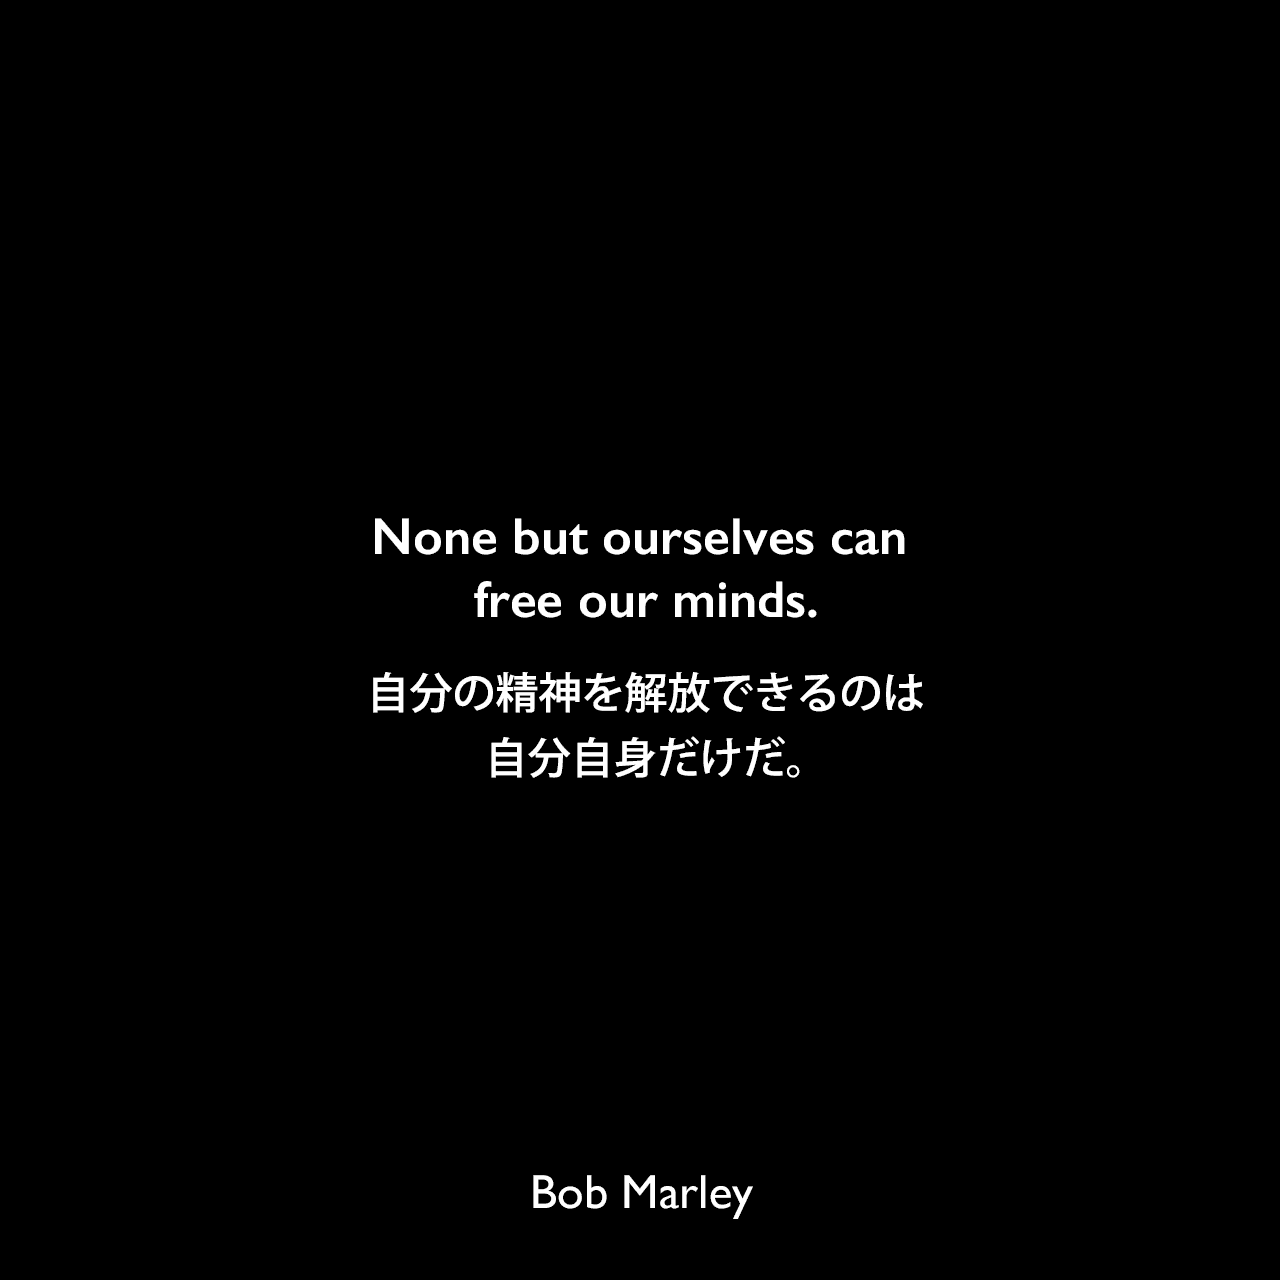 None but ourselves can free our minds.自分の精神を解放できるのは、自分自身だけだ。Bob Marley